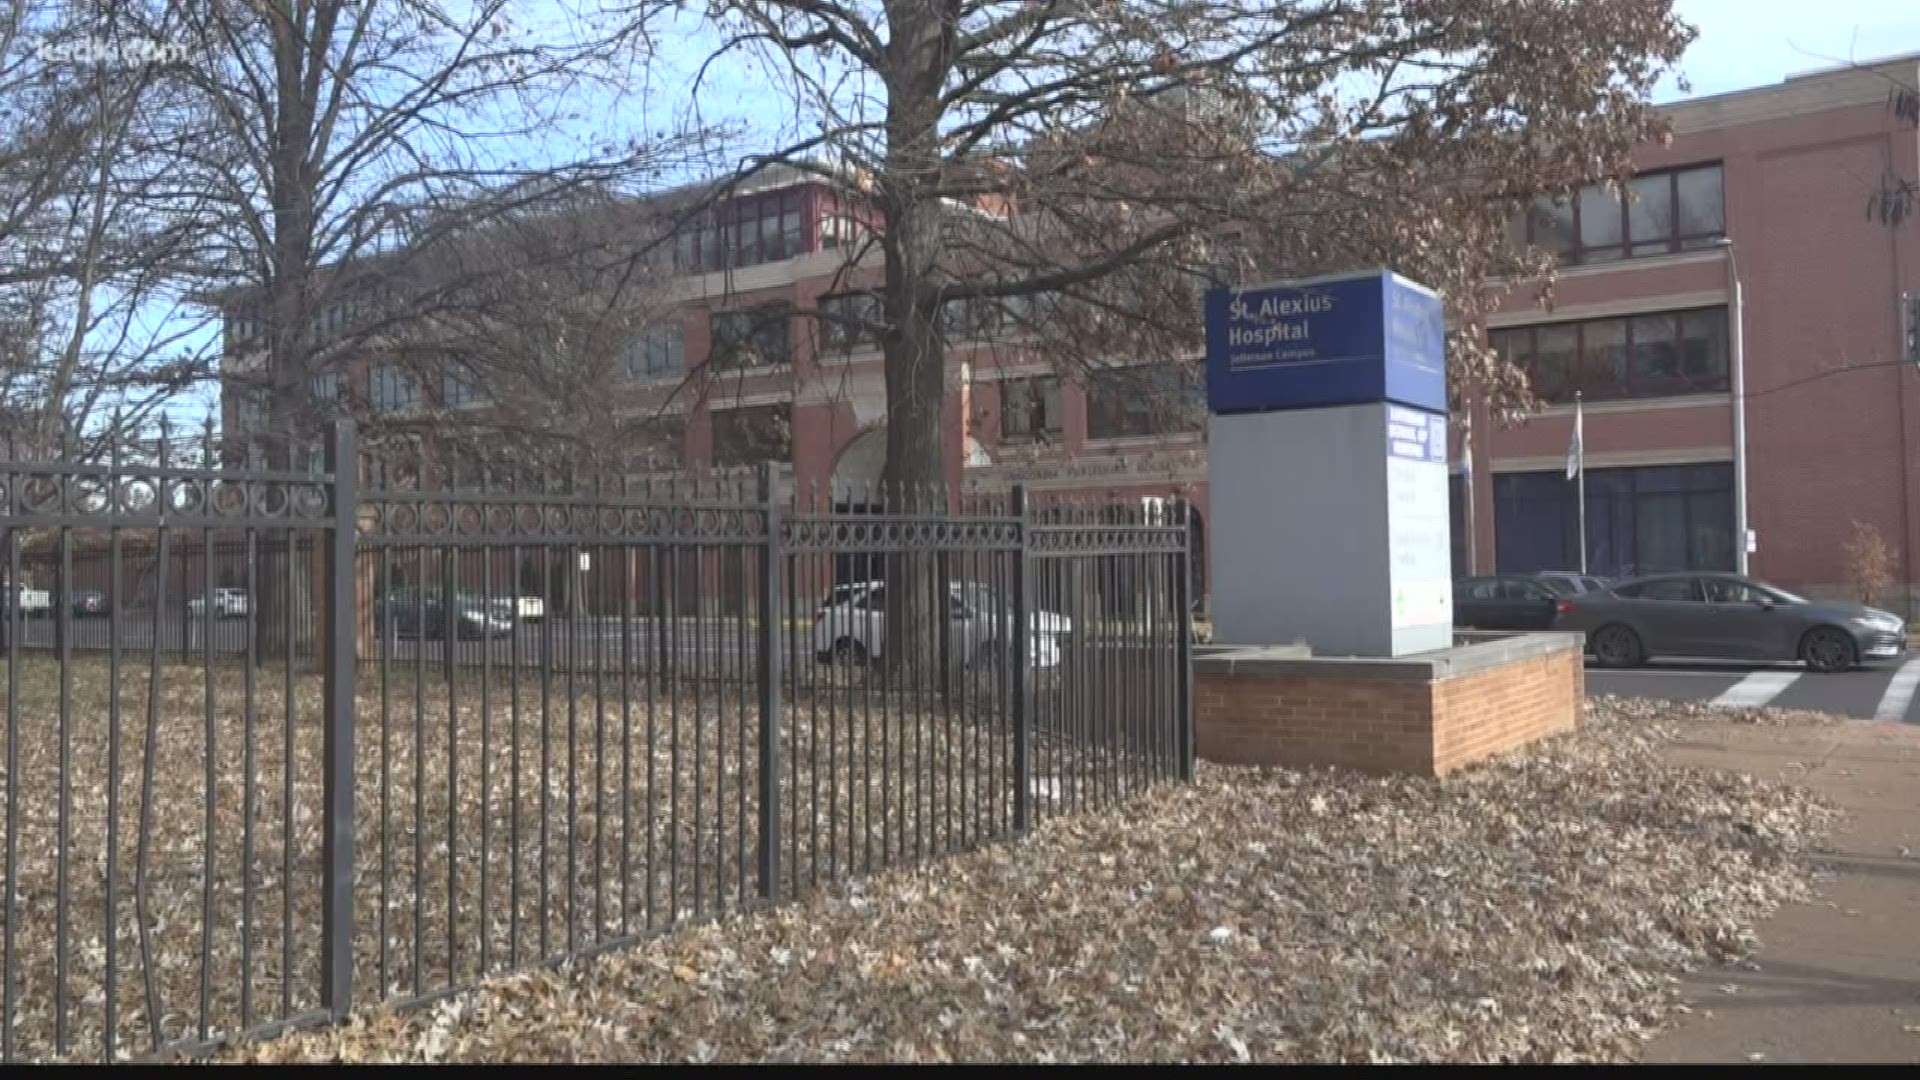 Lutheran School of Nursing has been given 34 days to turn things around after licensing test scores dropped below 80%.